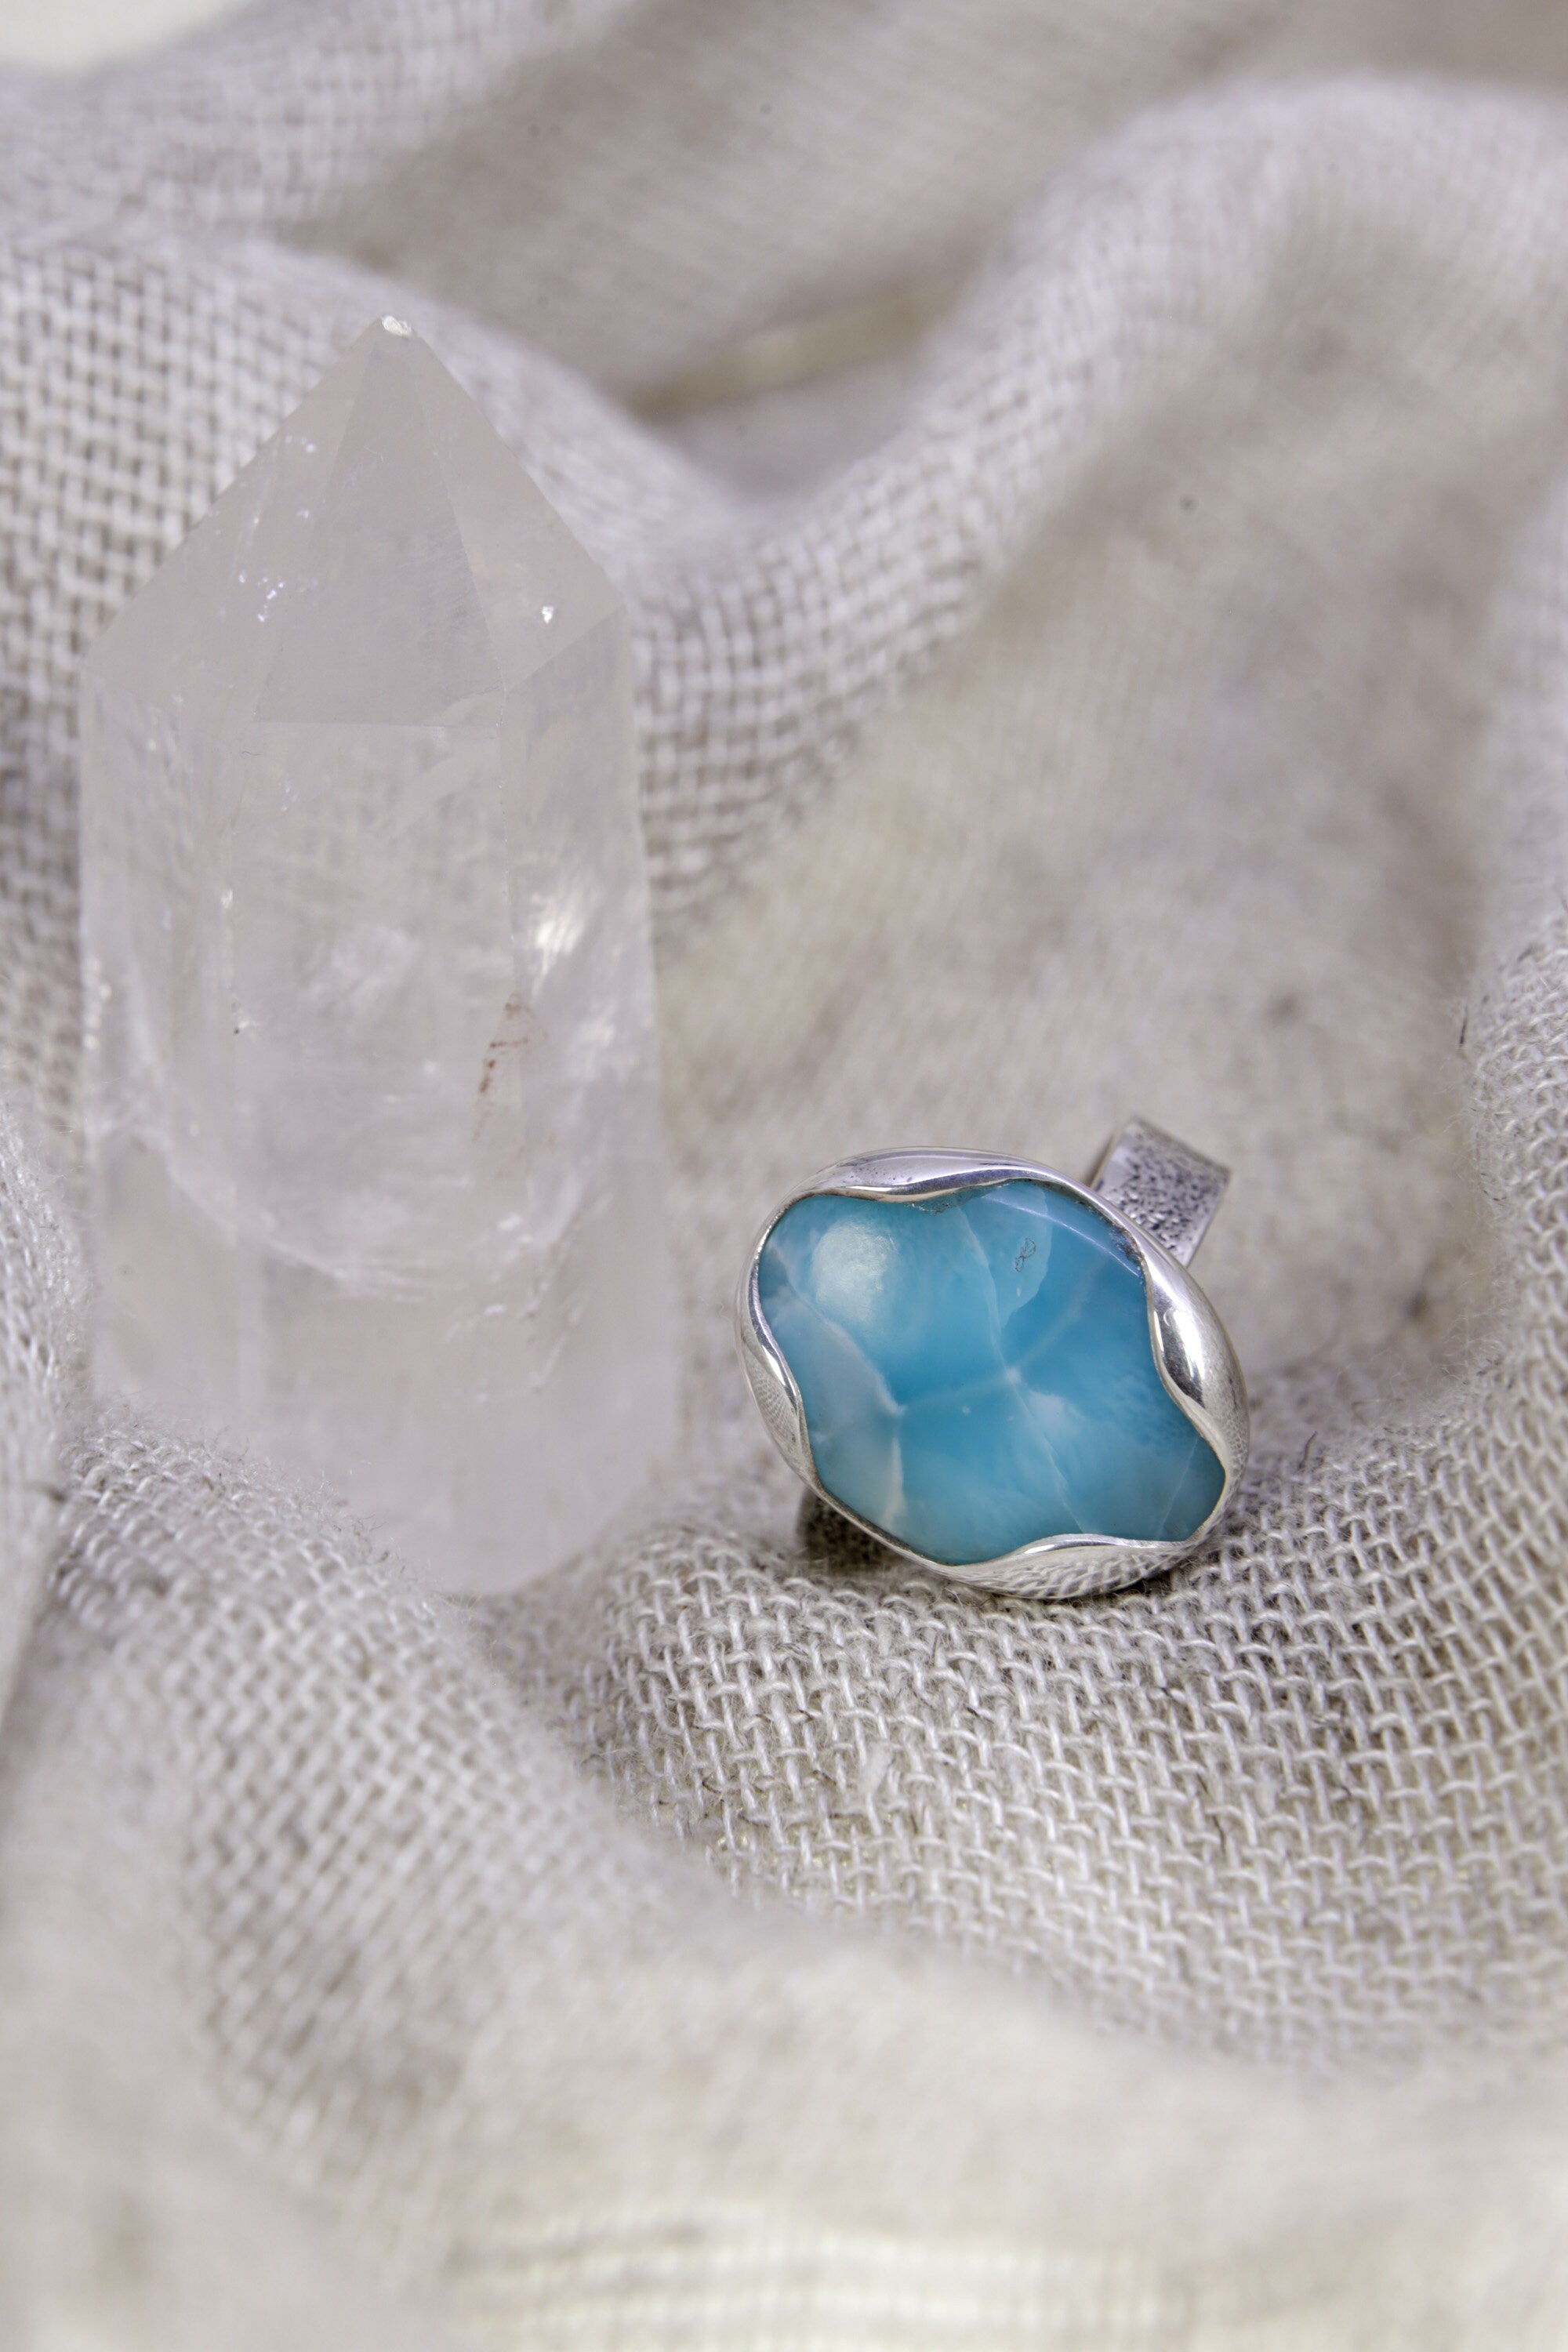 A Tribute to Oceanic Splendor: Adjustable Sterling Silver Ring with Oval Larimar - Unisex - Size 5-12 US - NO/07